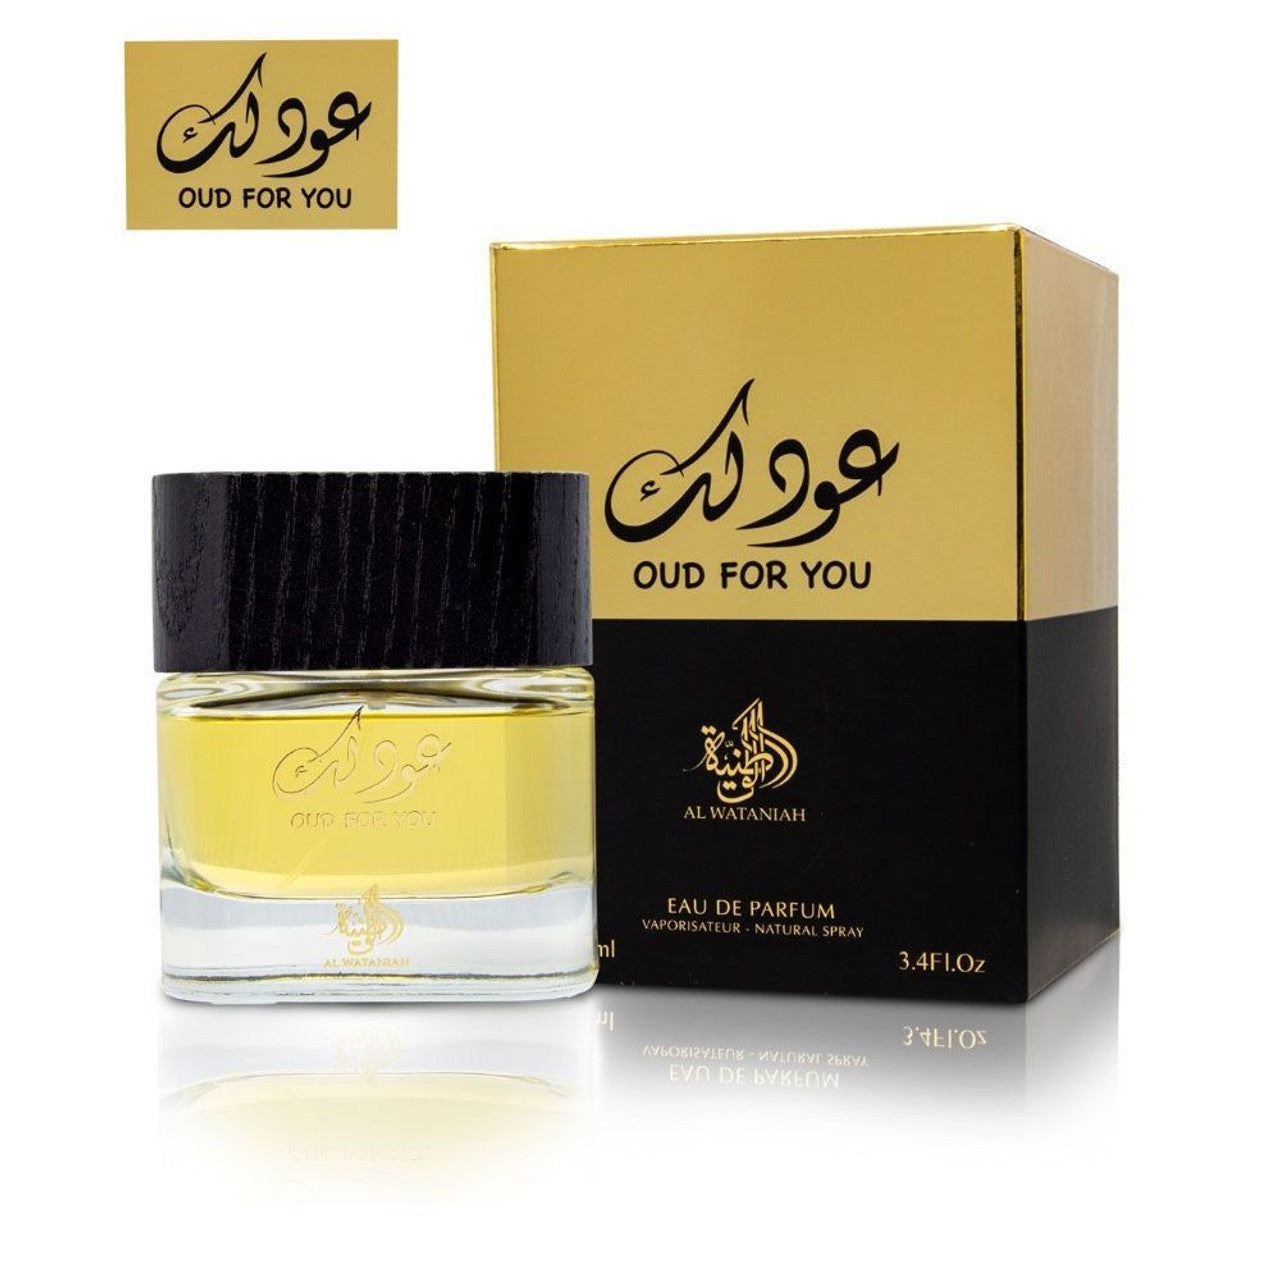 Oud for you